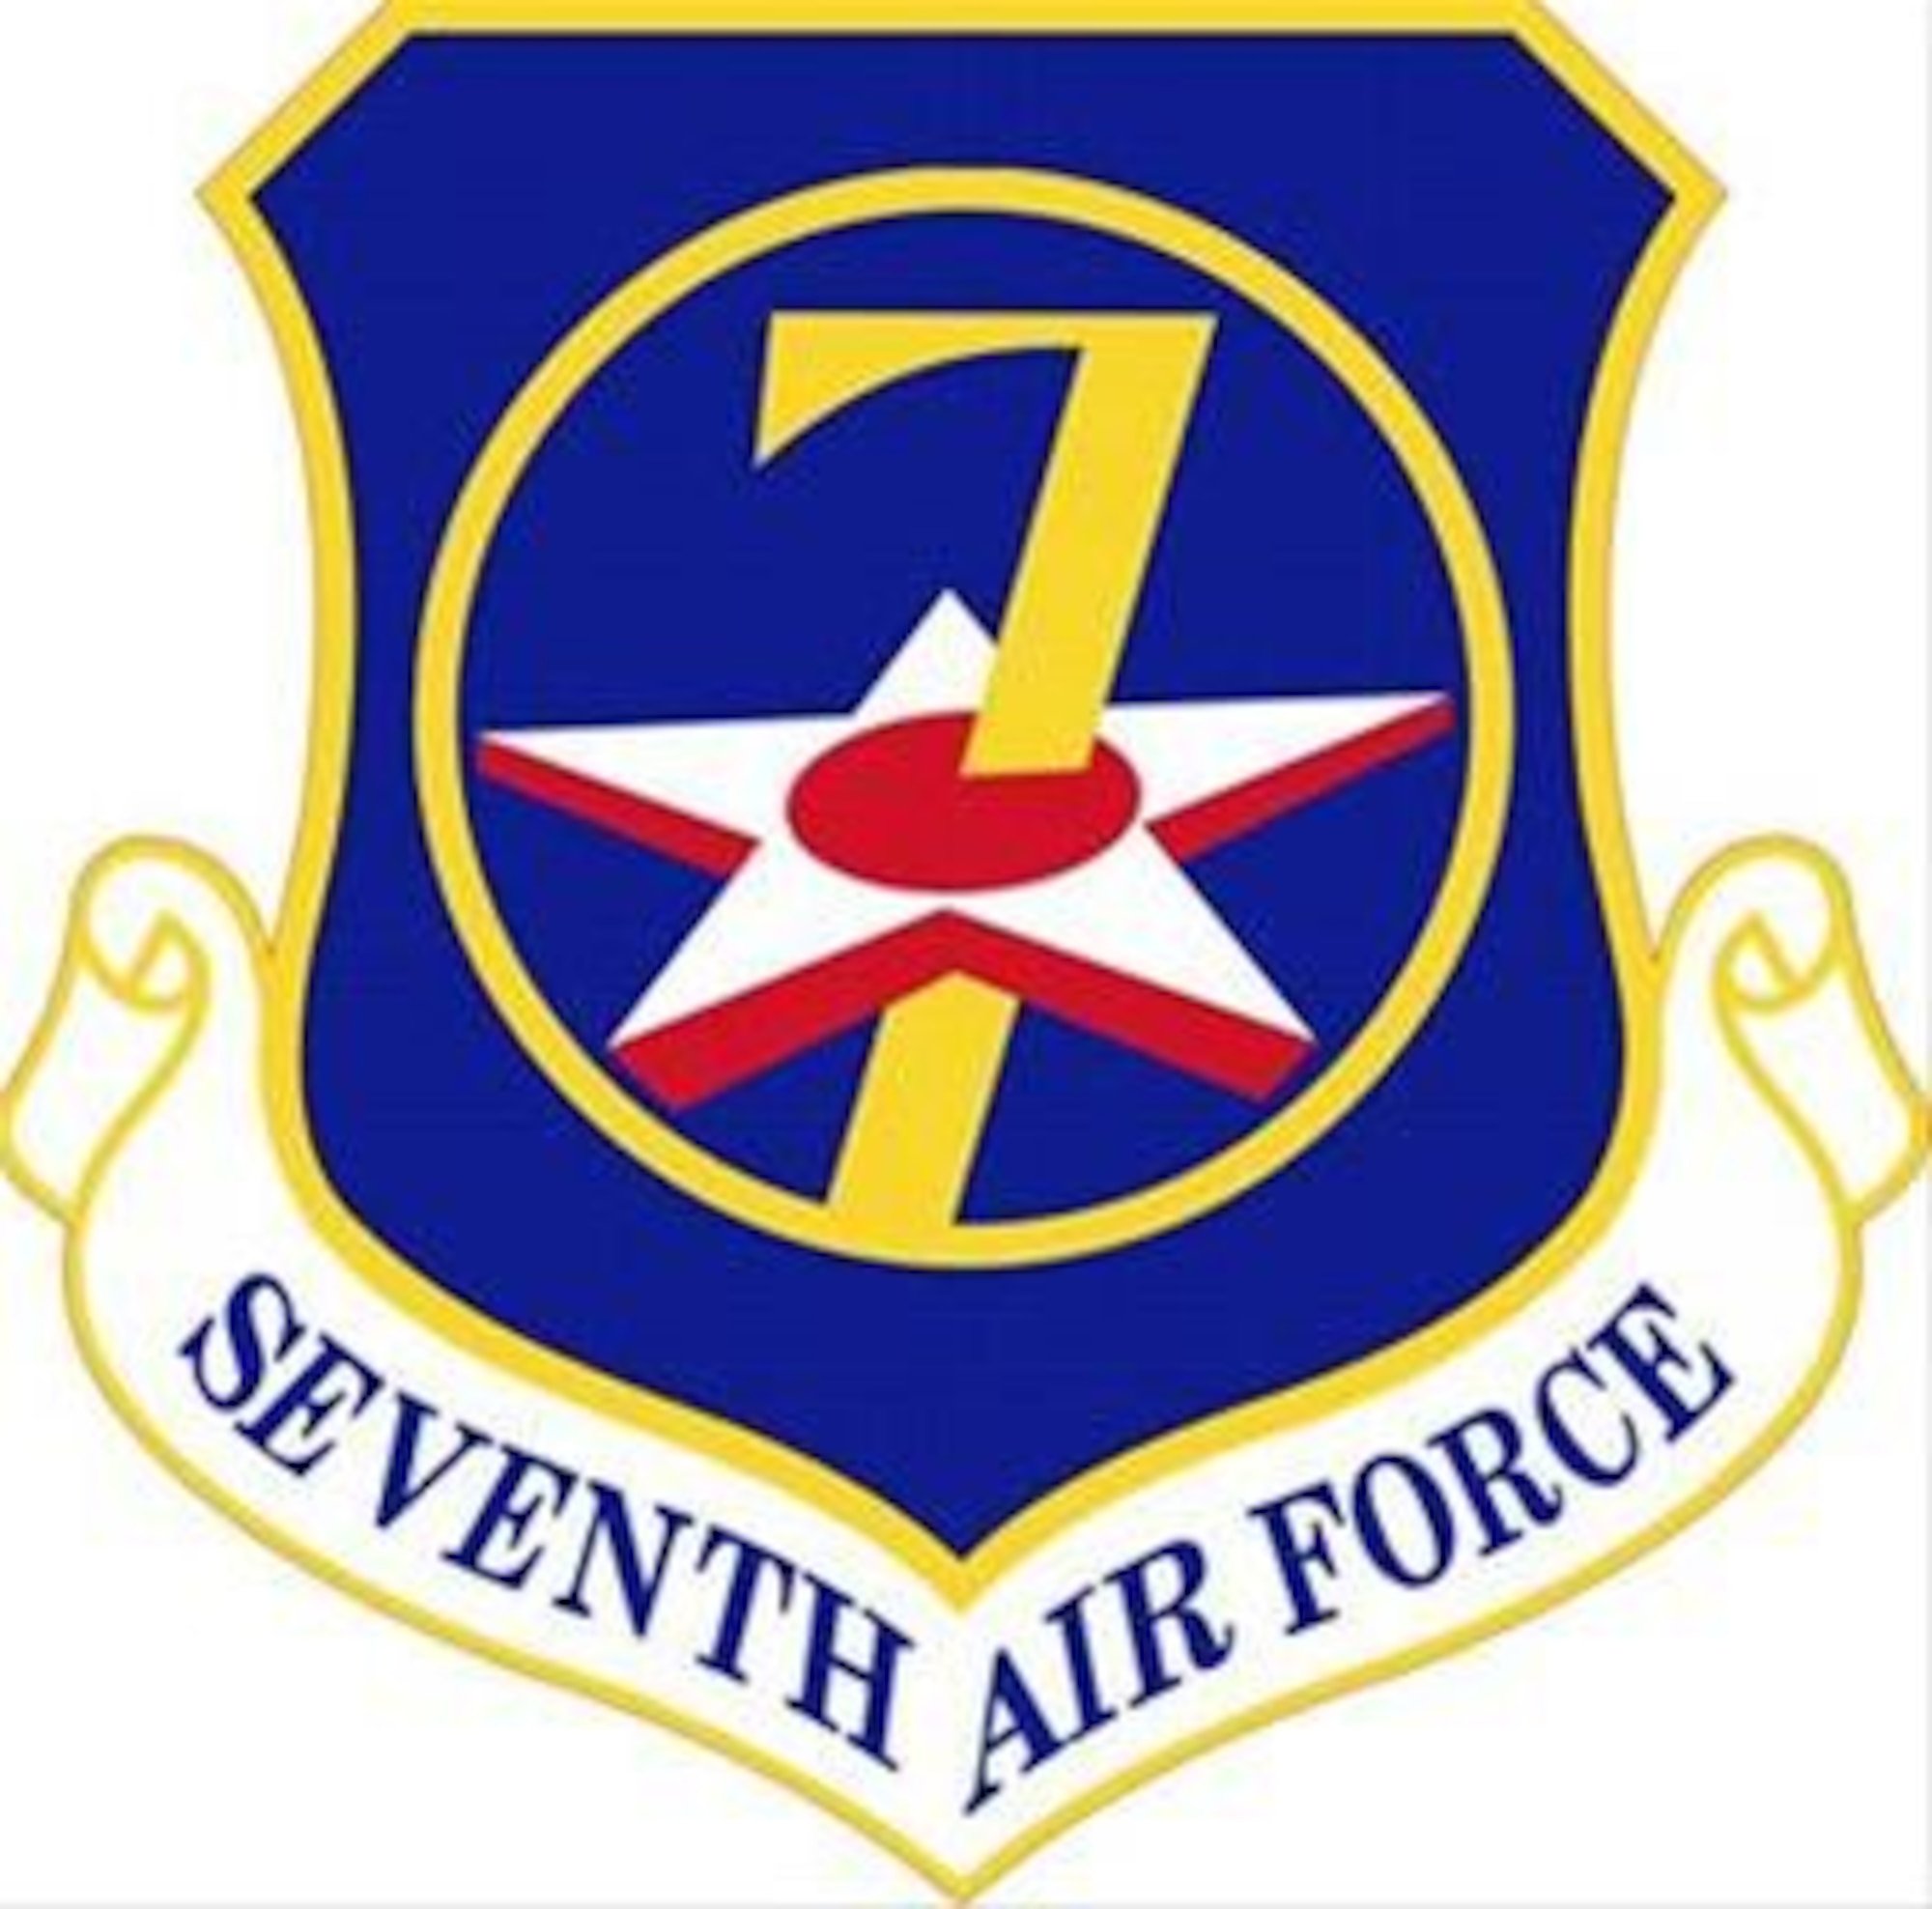 The 7th Air Force logo to accompany a statement by the unit commander.